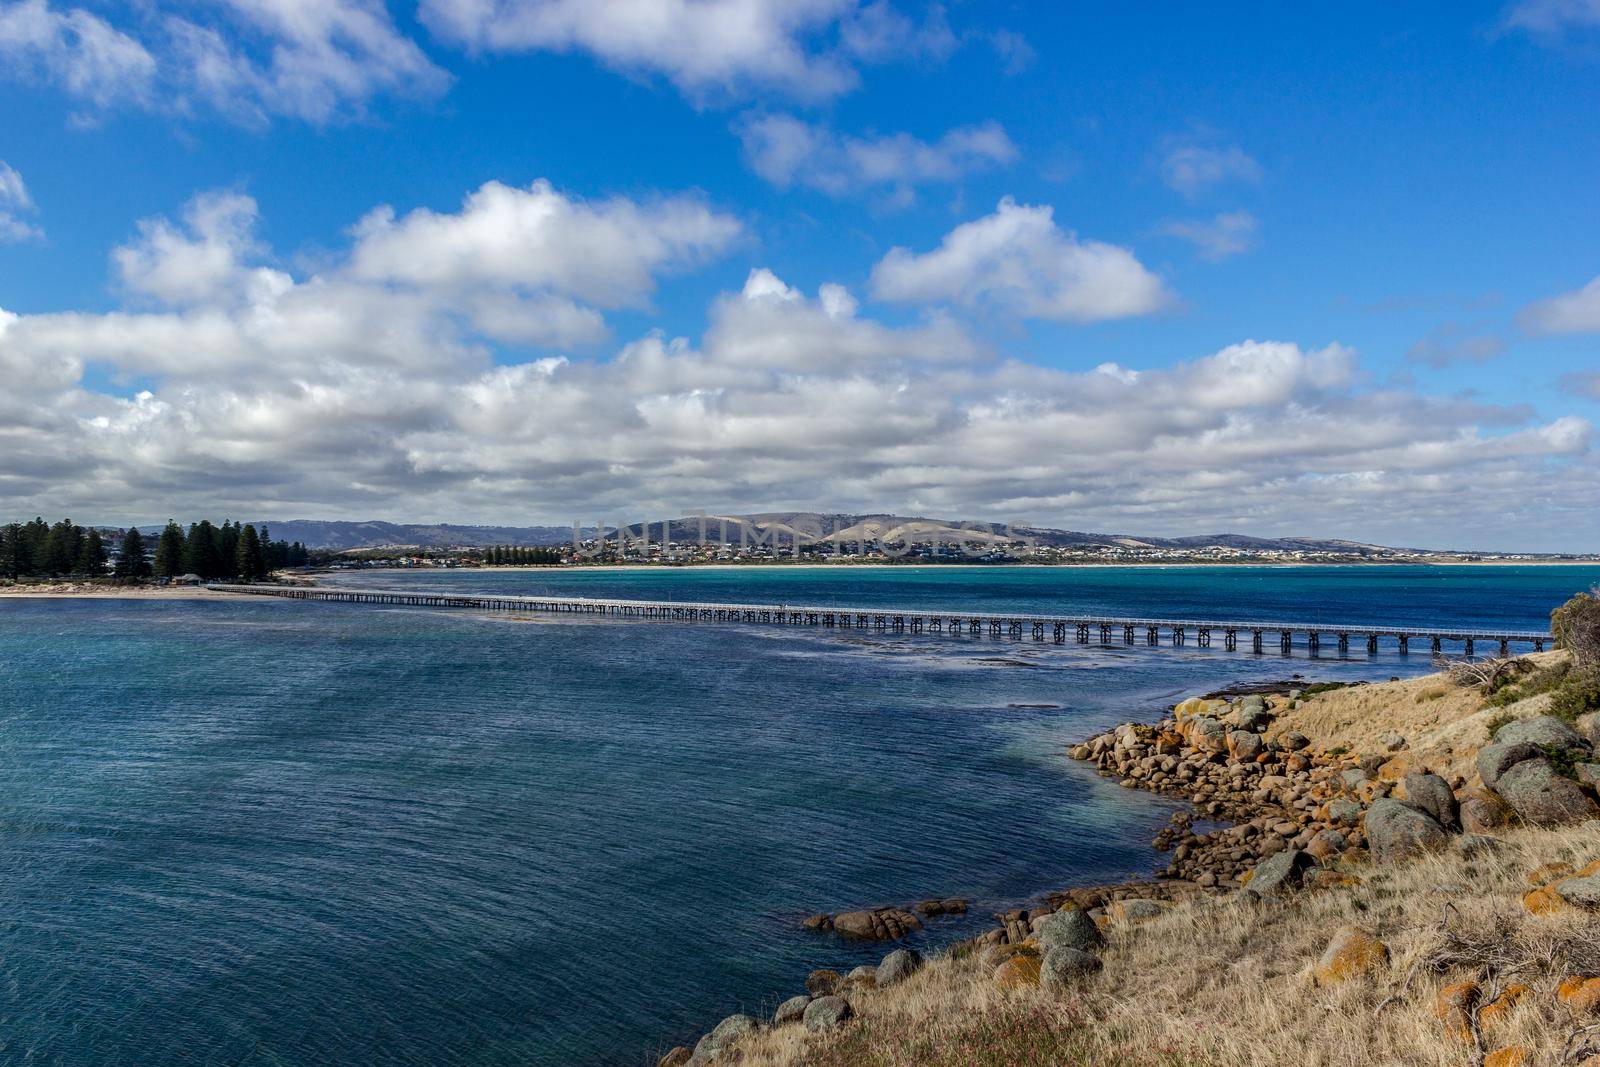 The Causeway Between Victor Harbour and Granite Island, South Australia by bettercallcurry